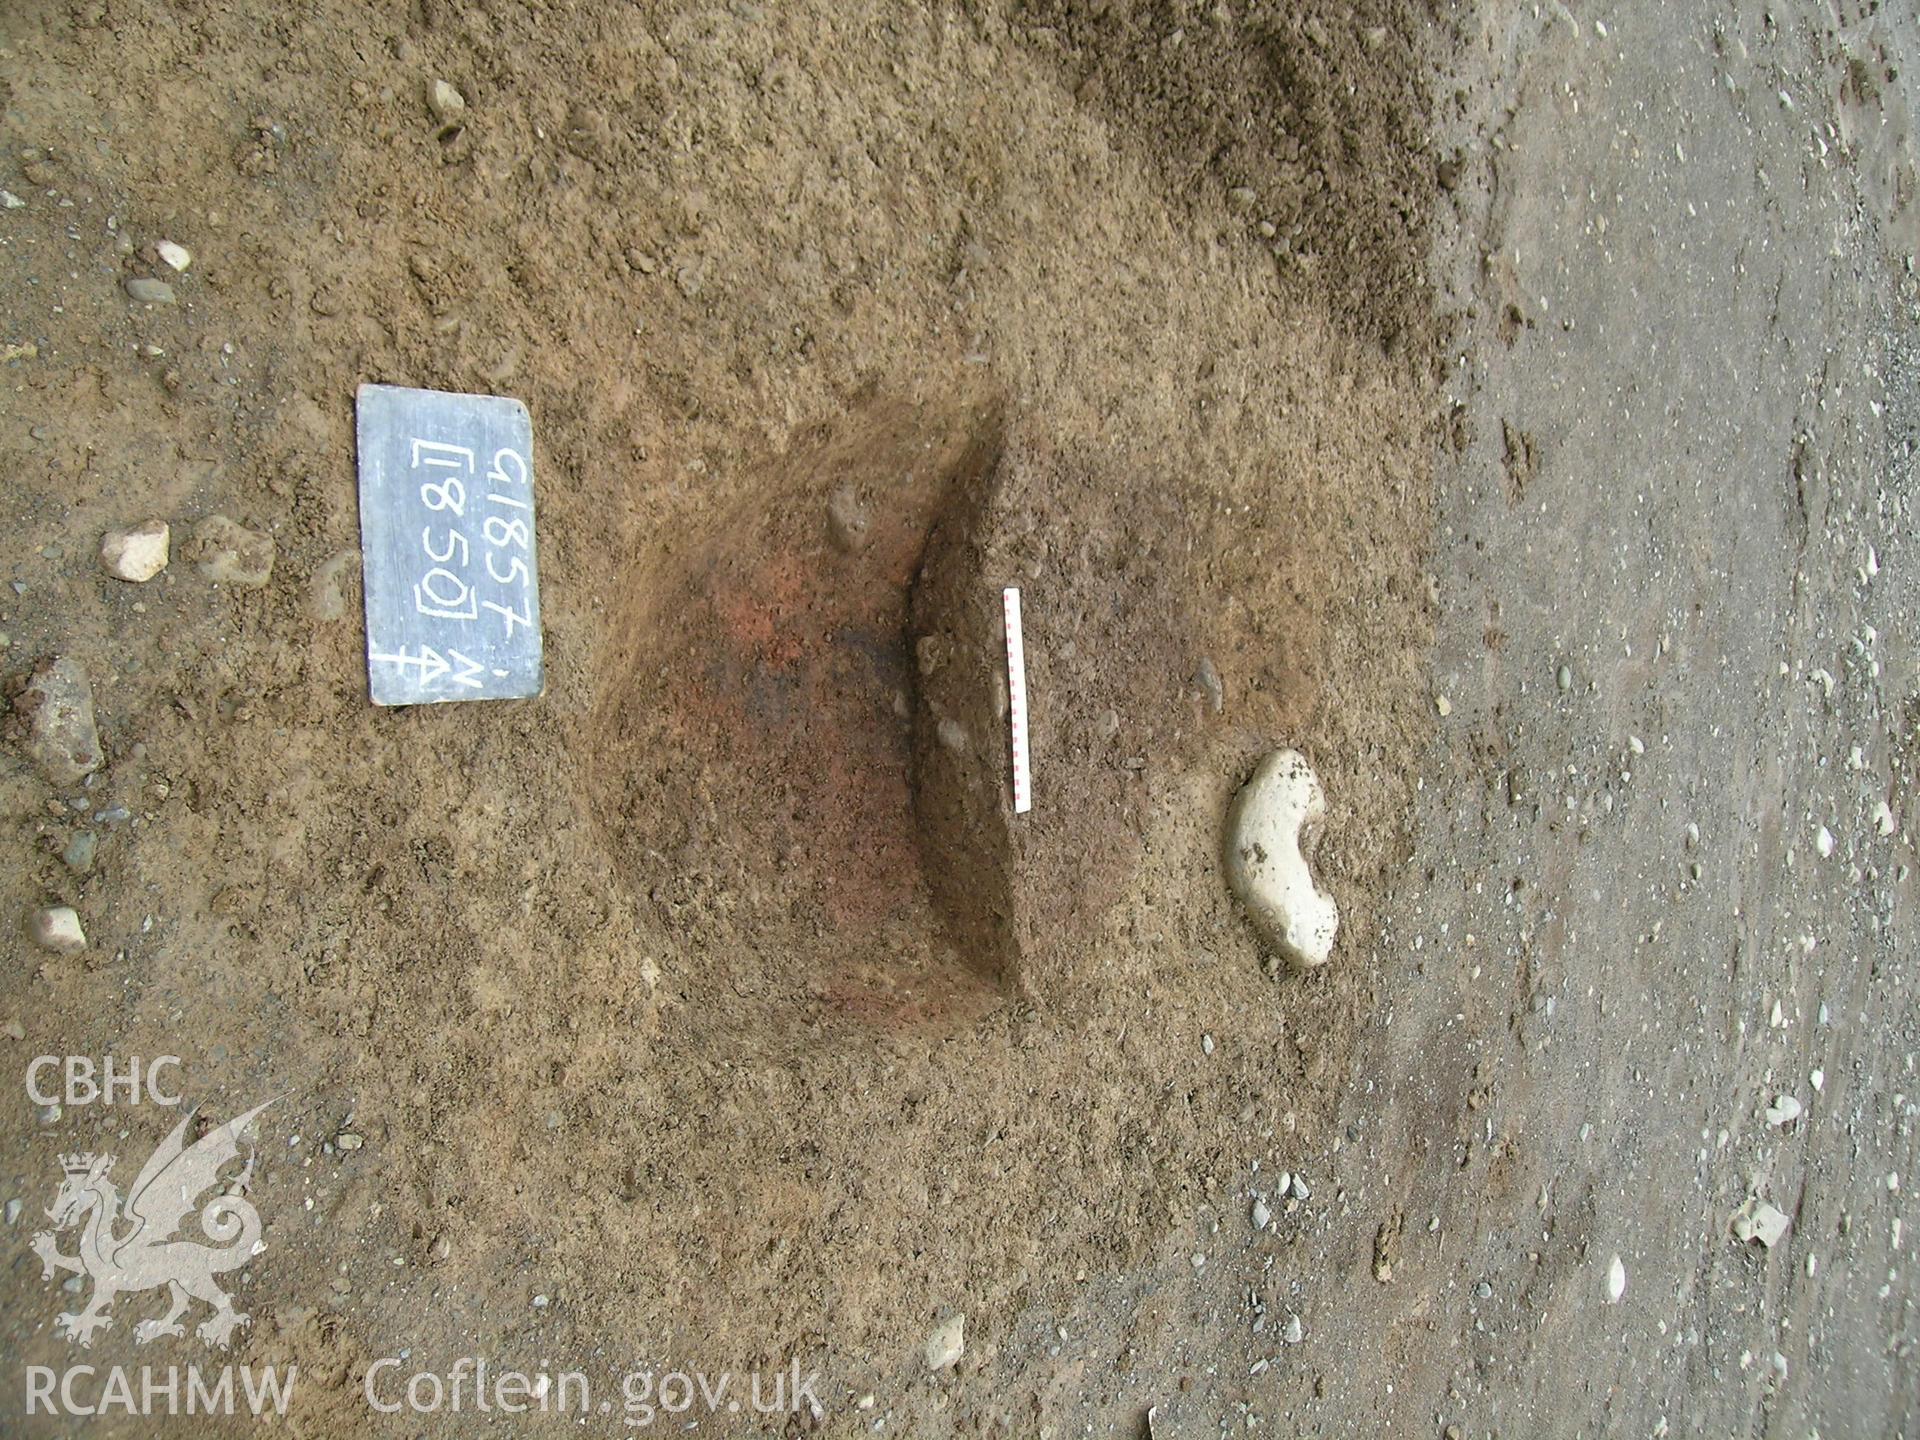 Digital photograph from excavation of Parc Bryn Cegin, Llandygai, by Gwynedd Archaeological Trust. 'Oven' cut [1850], from S (numbers refer to context records). Scale 0.2m.